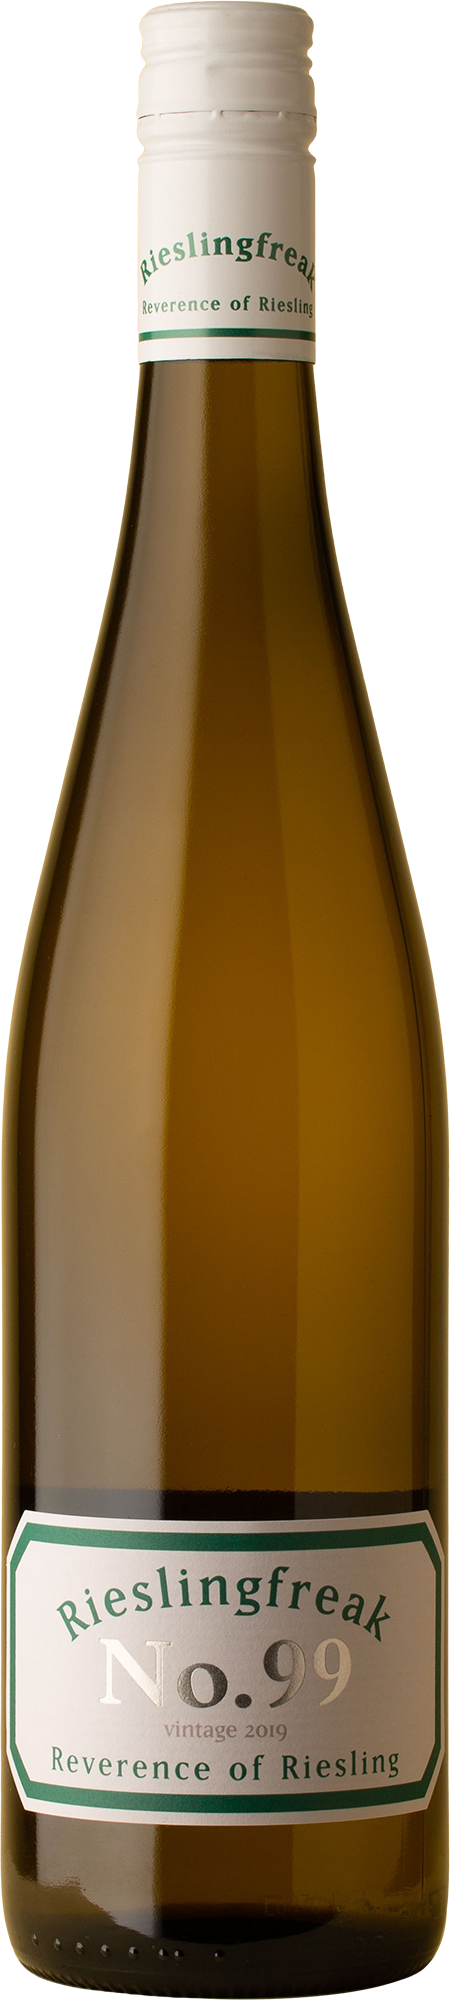 Rieslingfreak - No.99 Out Of The Square Riesling 2019 White Wine